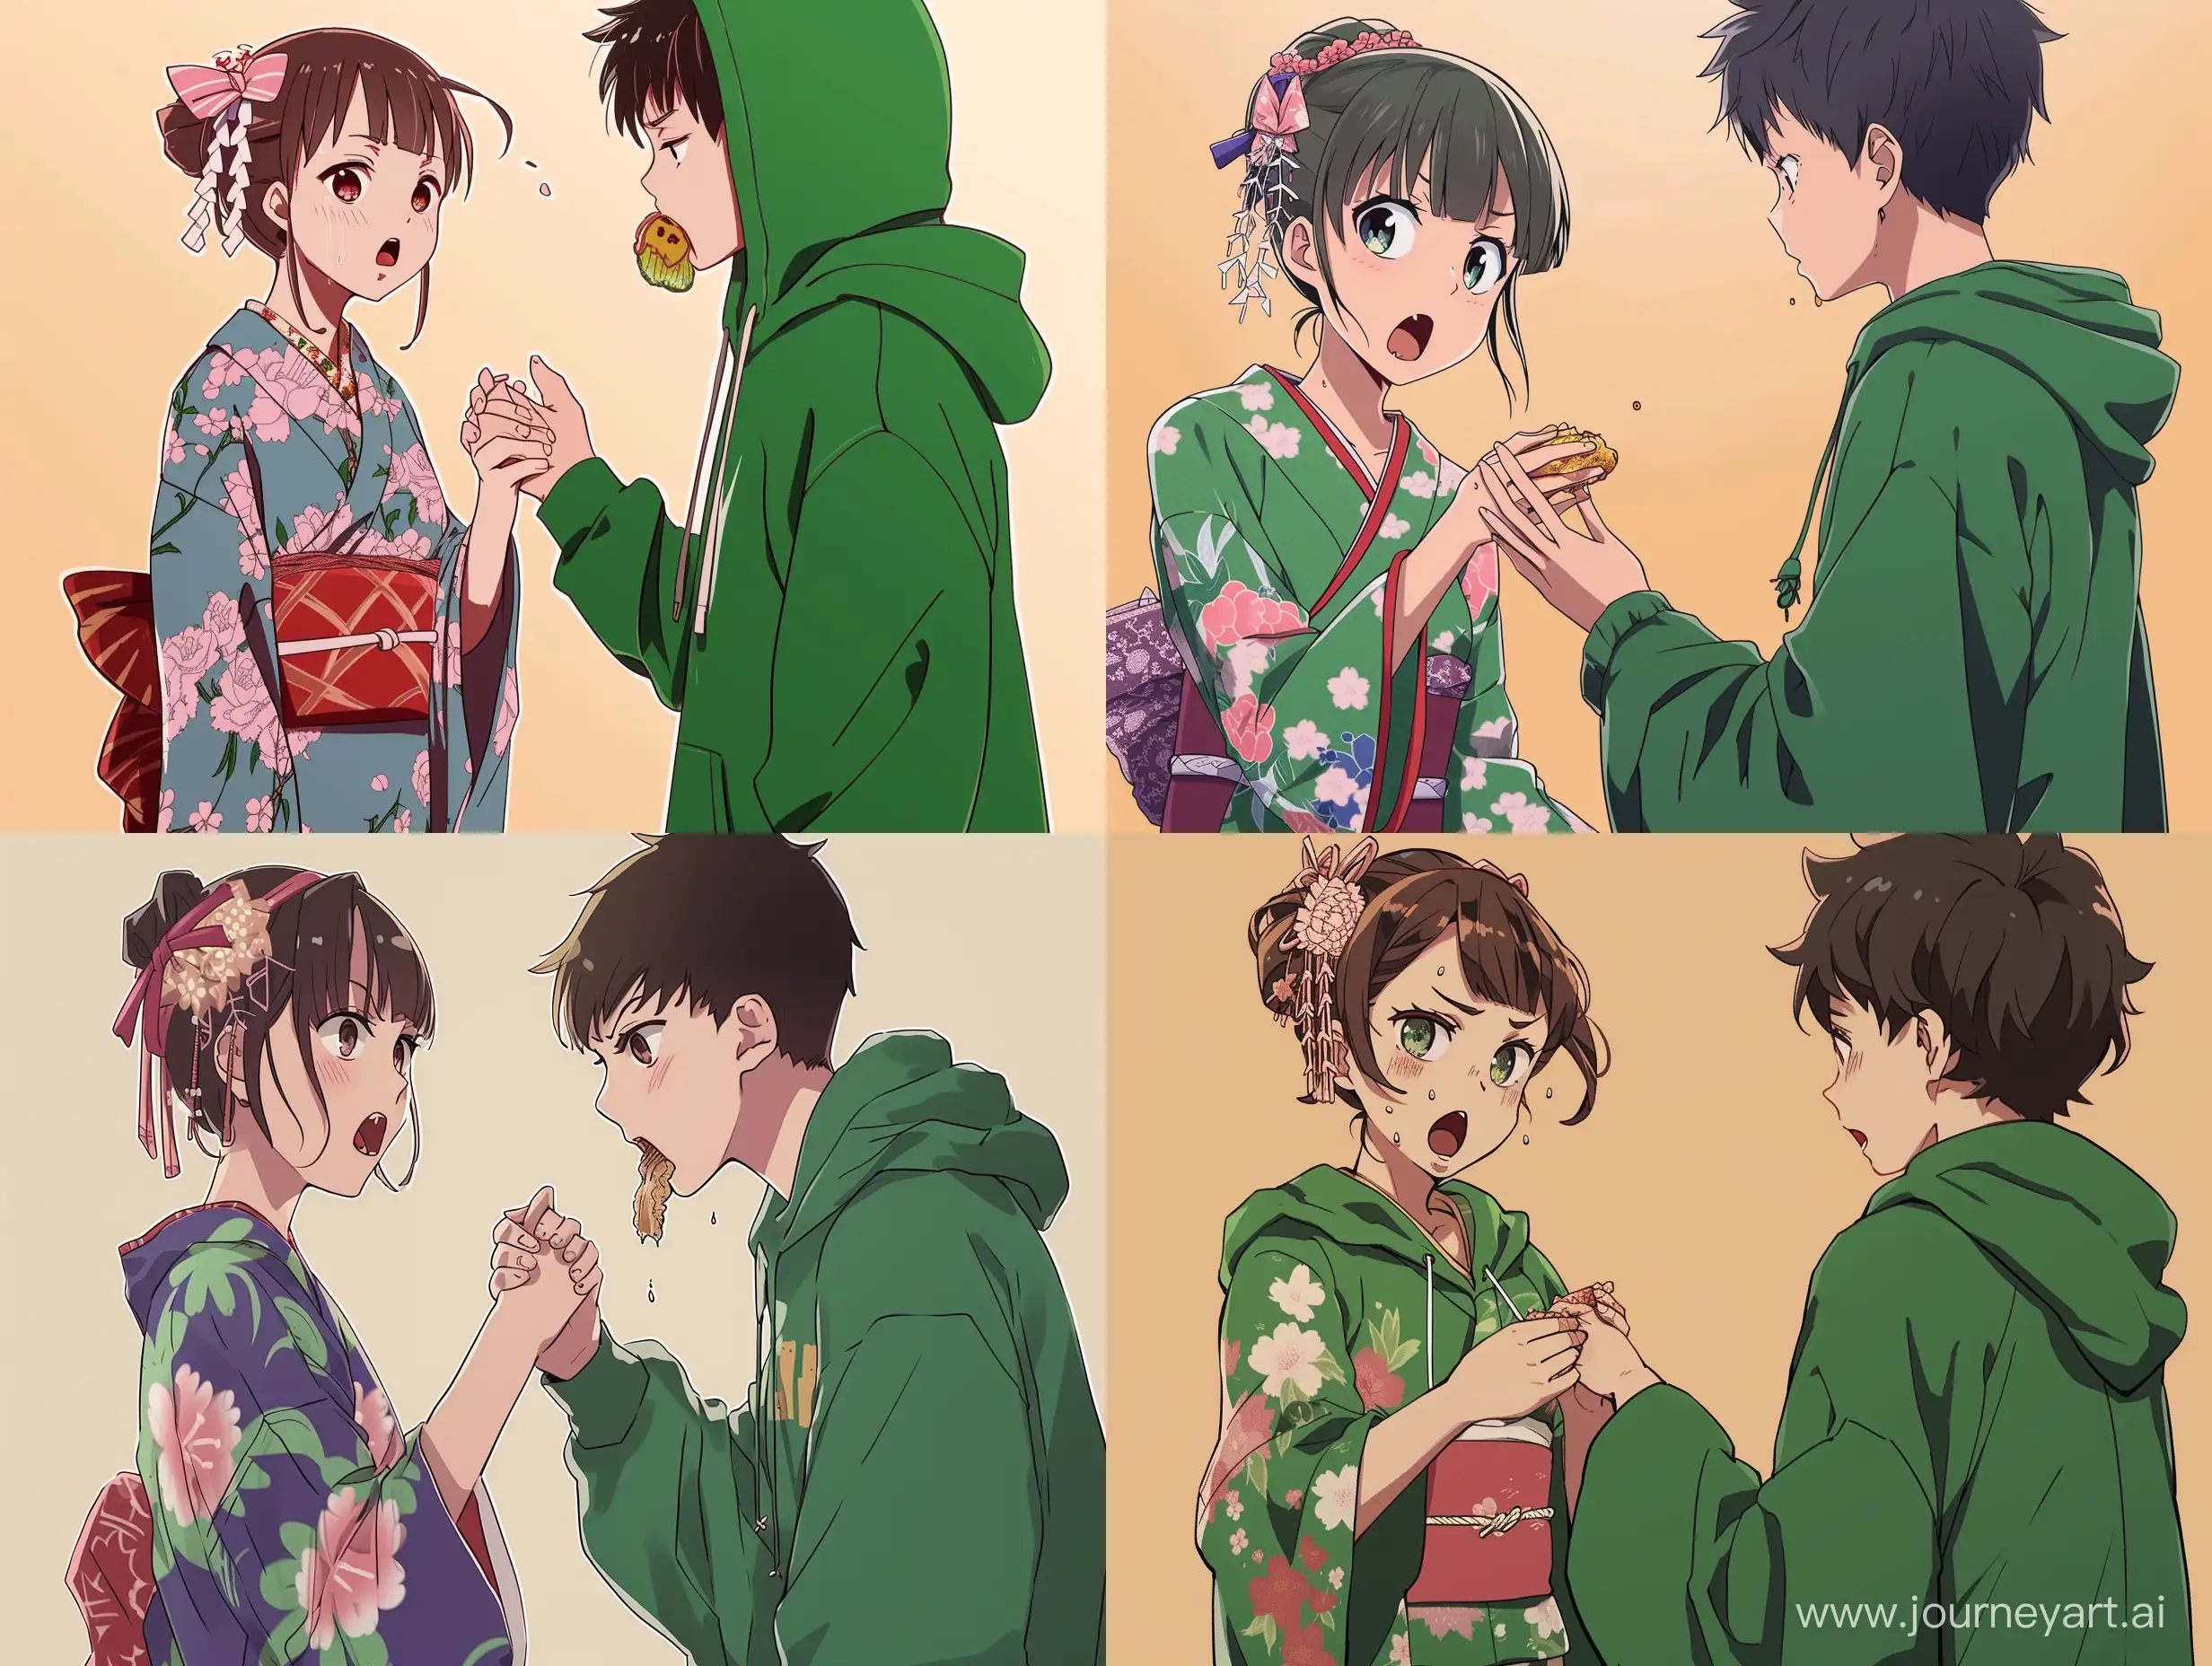 Heartfelt-Anime-Moment-KimonoClad-Girl-and-Green-Hoodie-Boy-Share-a-Touching-Connection